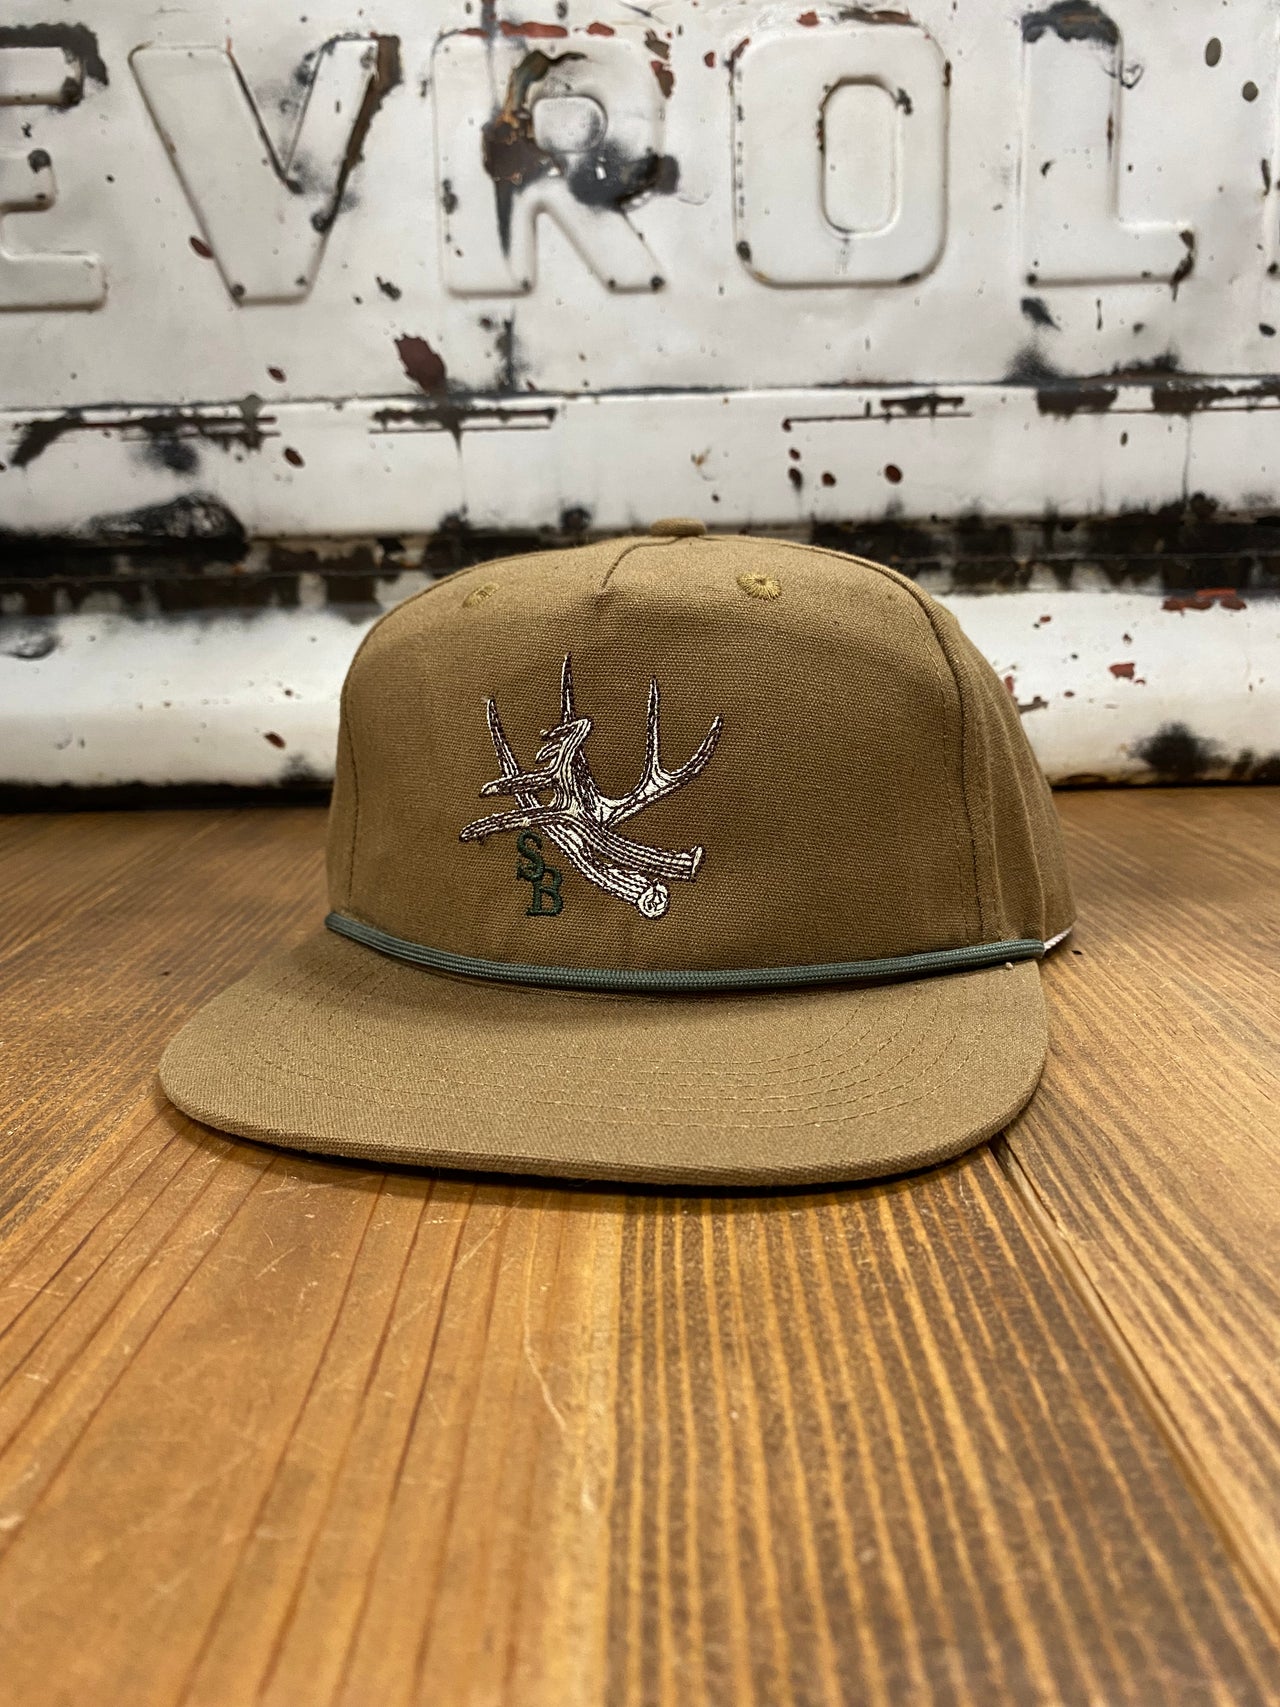 Speckle Bellies Antler Rope Tobacco Color Cap featuring a rustic antler rope design on a 100% cotton base in a earthy tobacco color. Crafted with durable 550 Paracord, mid-crown style, and an adjustable snapback closure for a versatile and stylish outdoor accessory. One Size Fits Most."